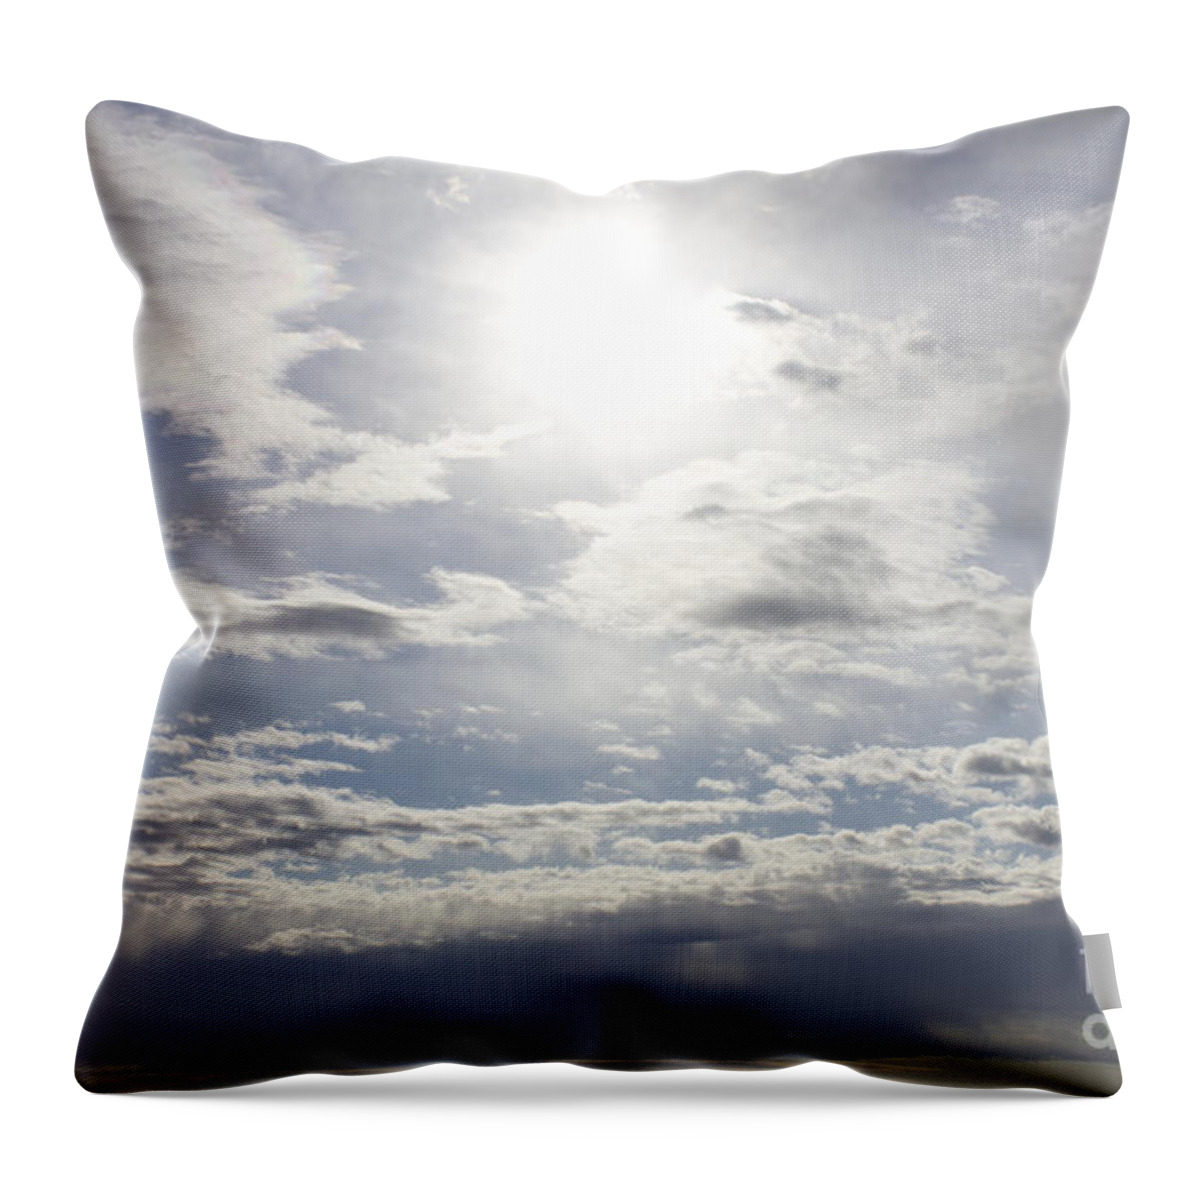 Landscape Throw Pillow featuring the photograph Sunspot Clouds by Donna L Munro